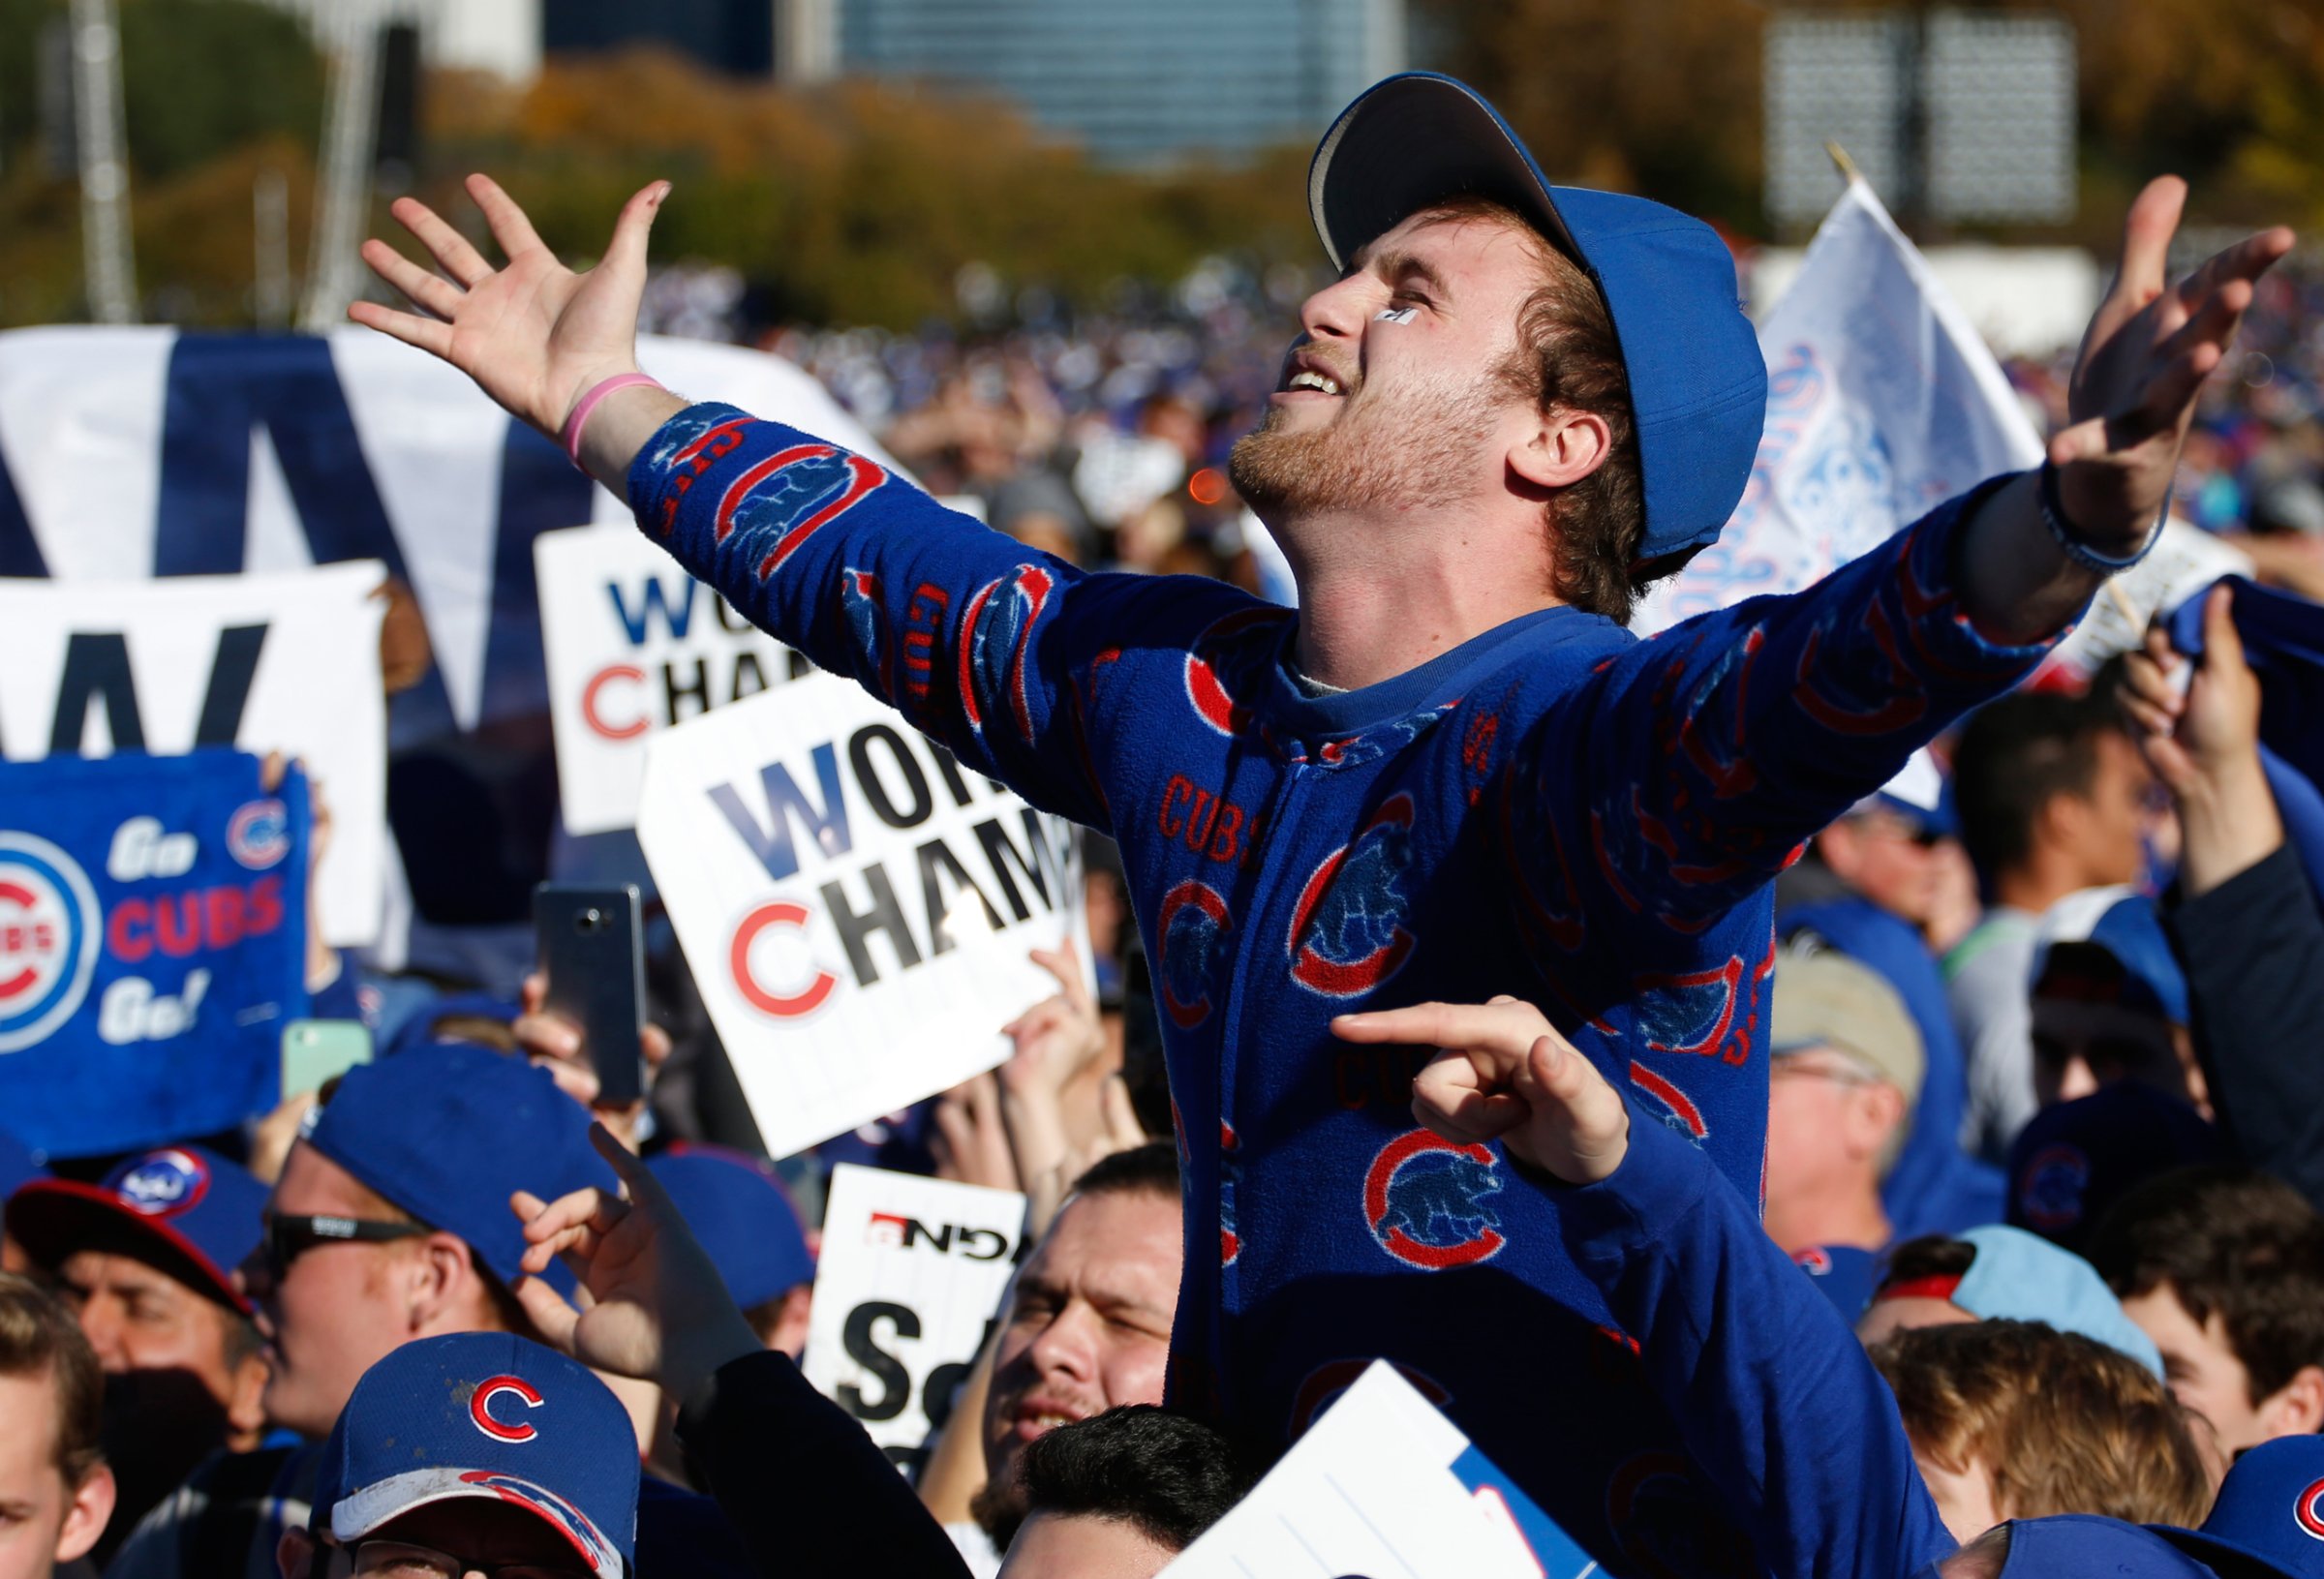 Chicago Cubs fans celebrate before a rally in Grant Park honoring the World Series baseball champions in Chicago, Friday, Nov. 4, 2016. (AP Photo/Nam Y. Huh)